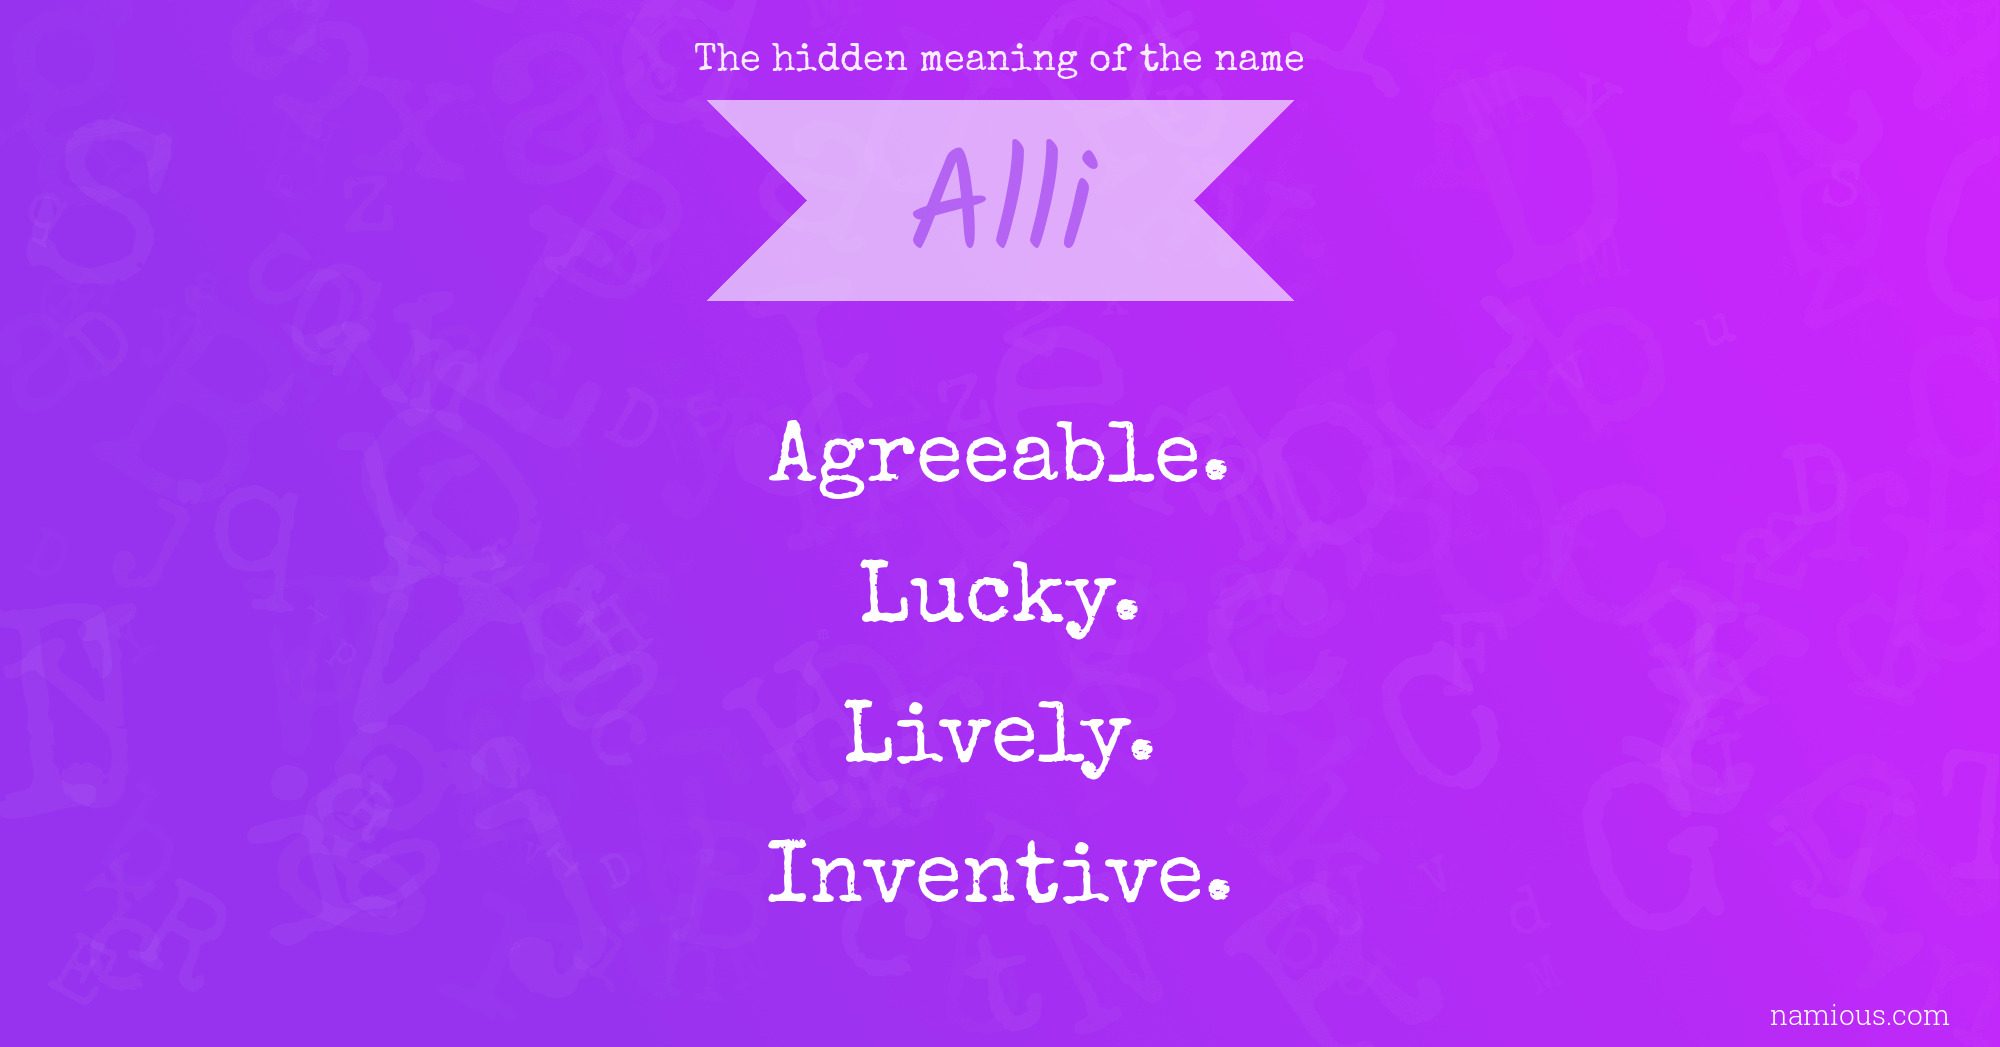 The hidden meaning of the name Alli